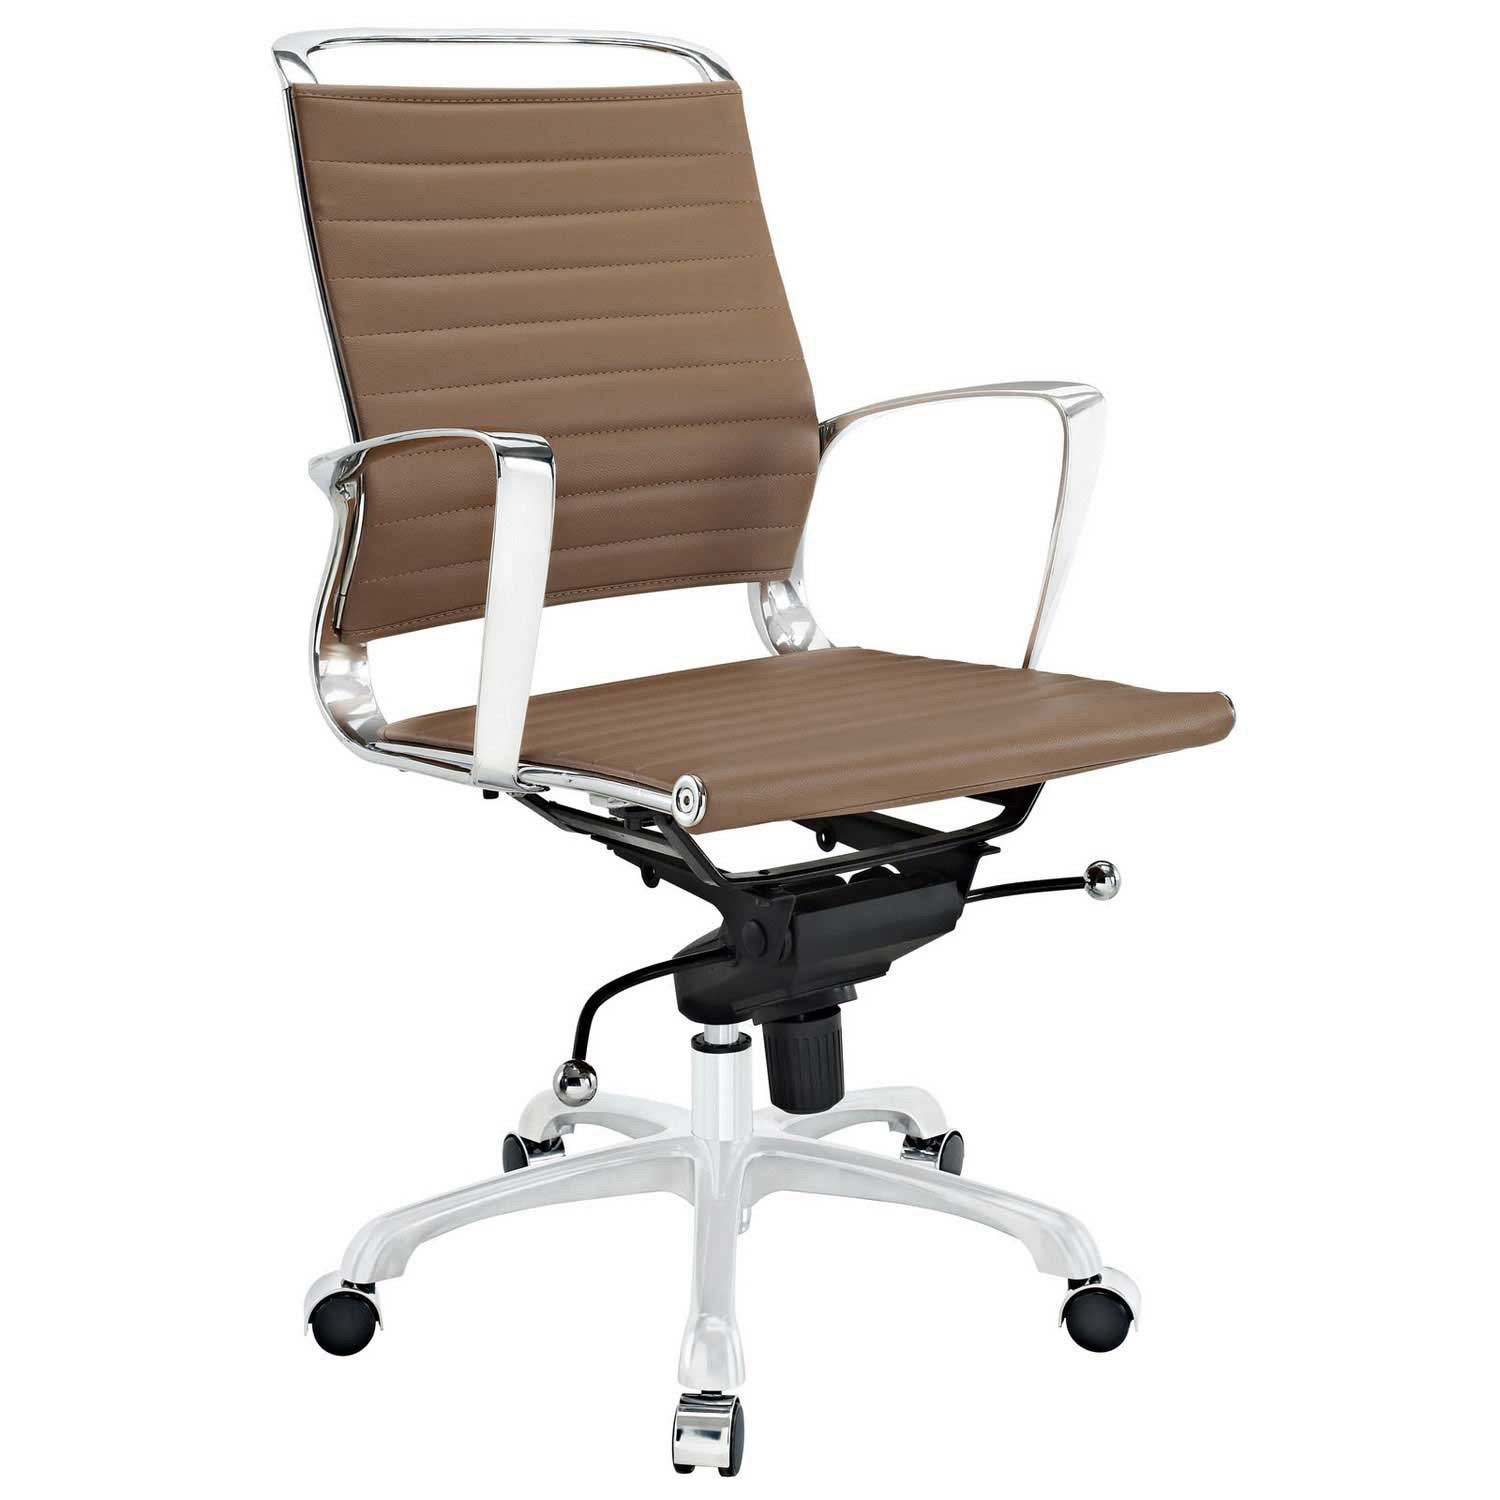 Modway Tempo Mid Back Office Chair - Tan